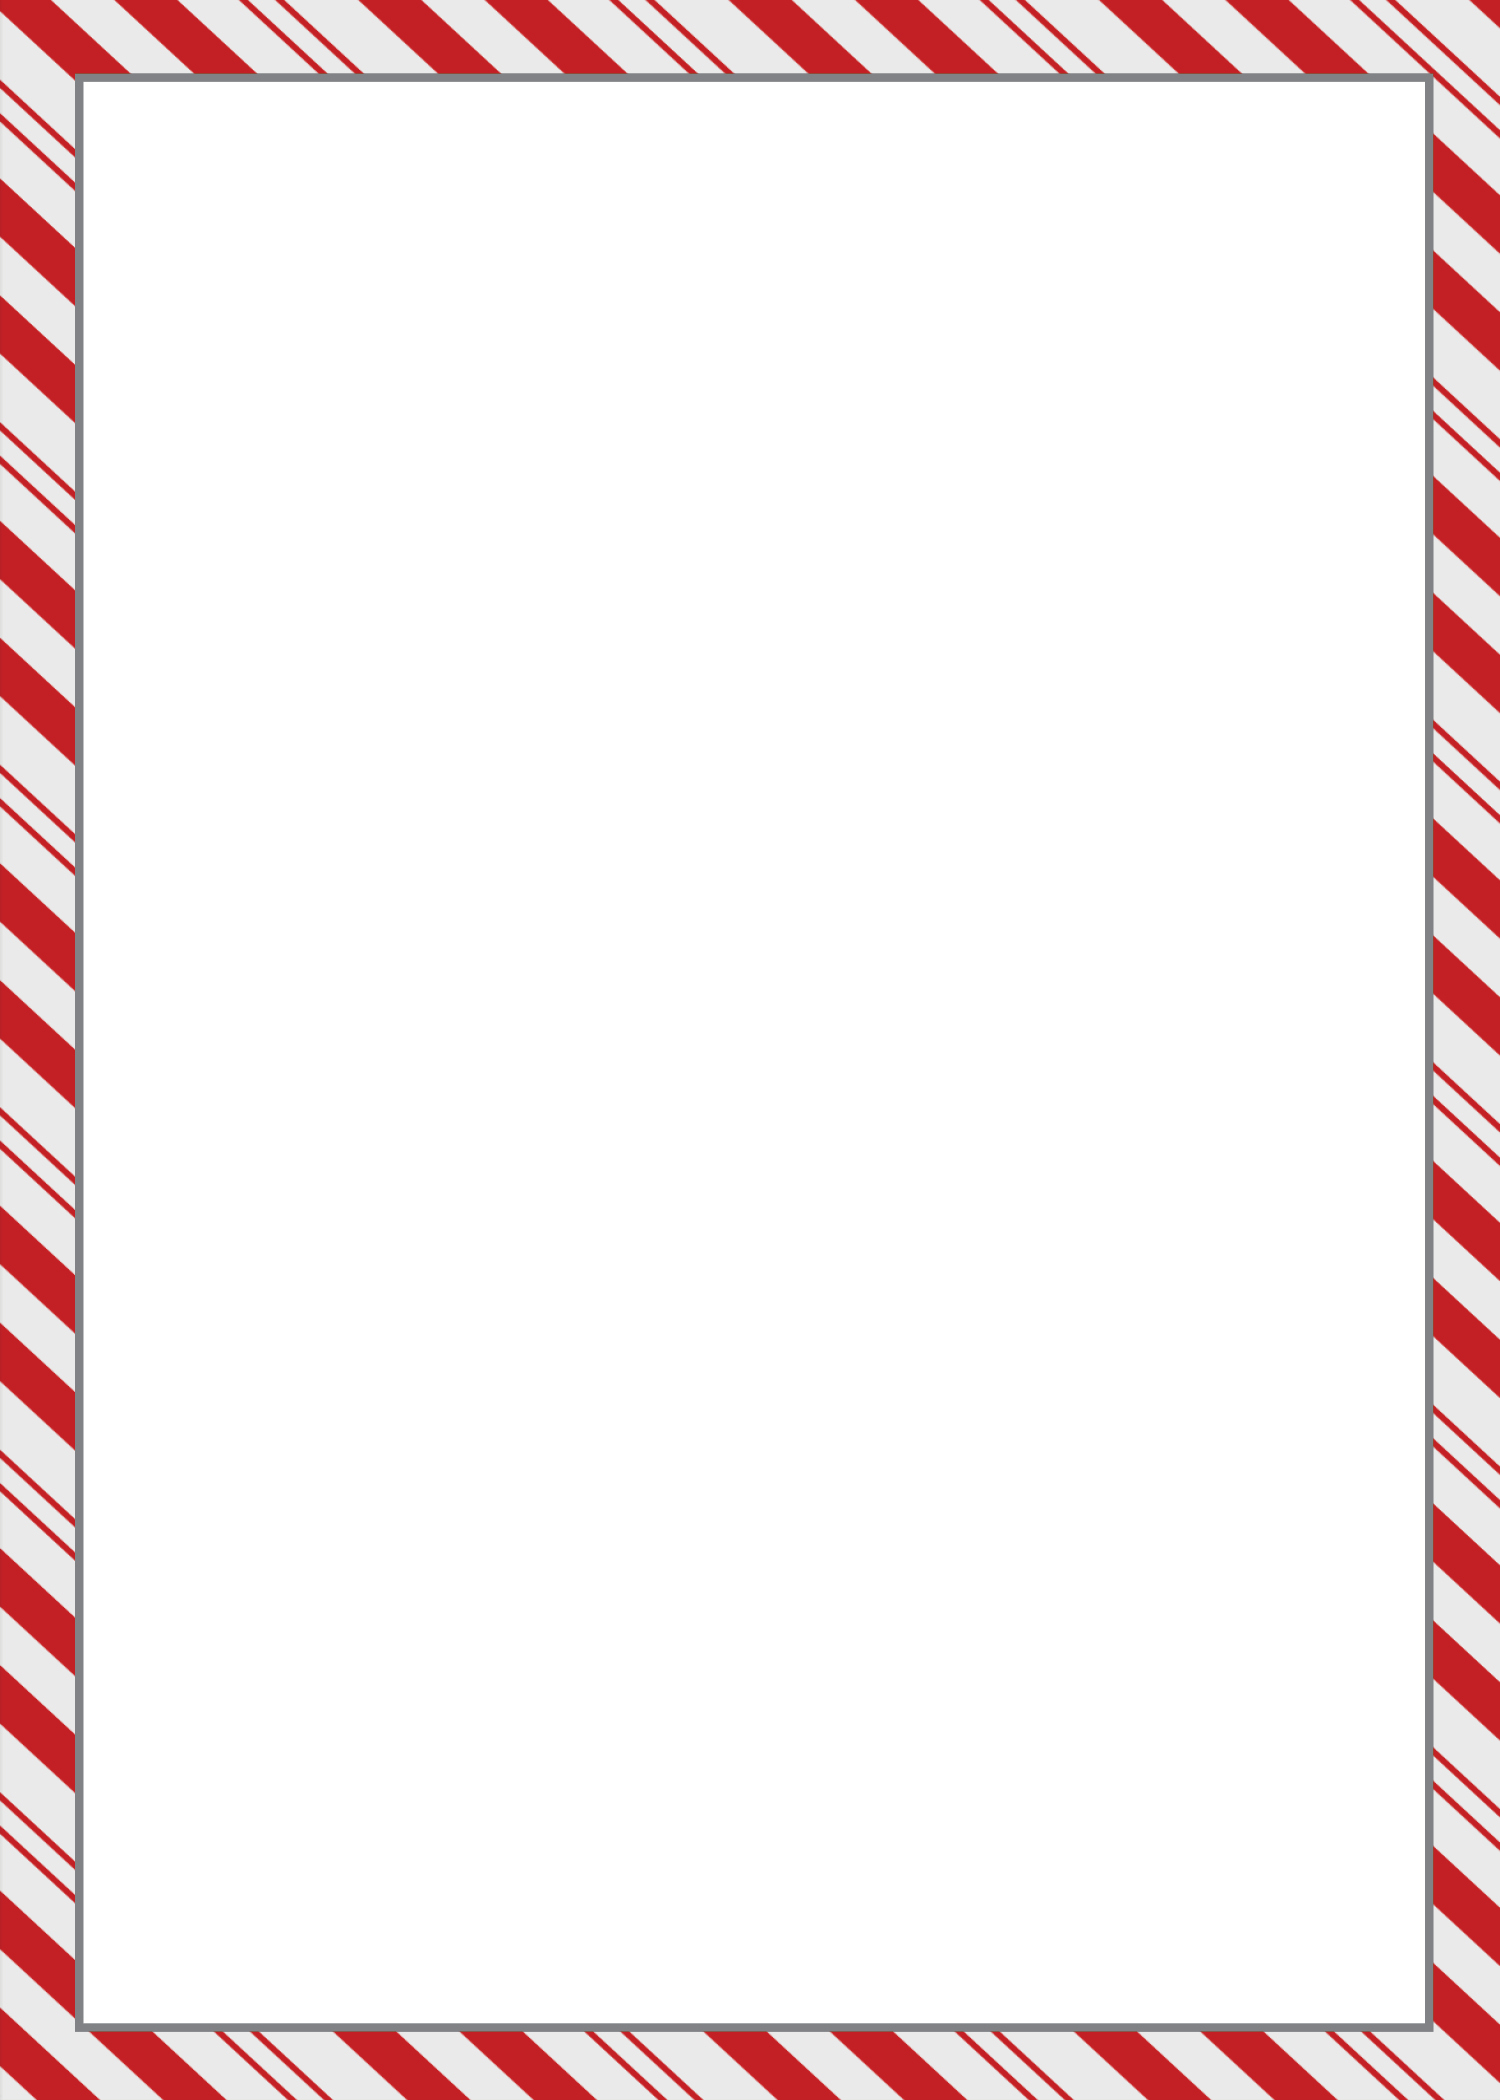 Candy Cane Border Clipart 